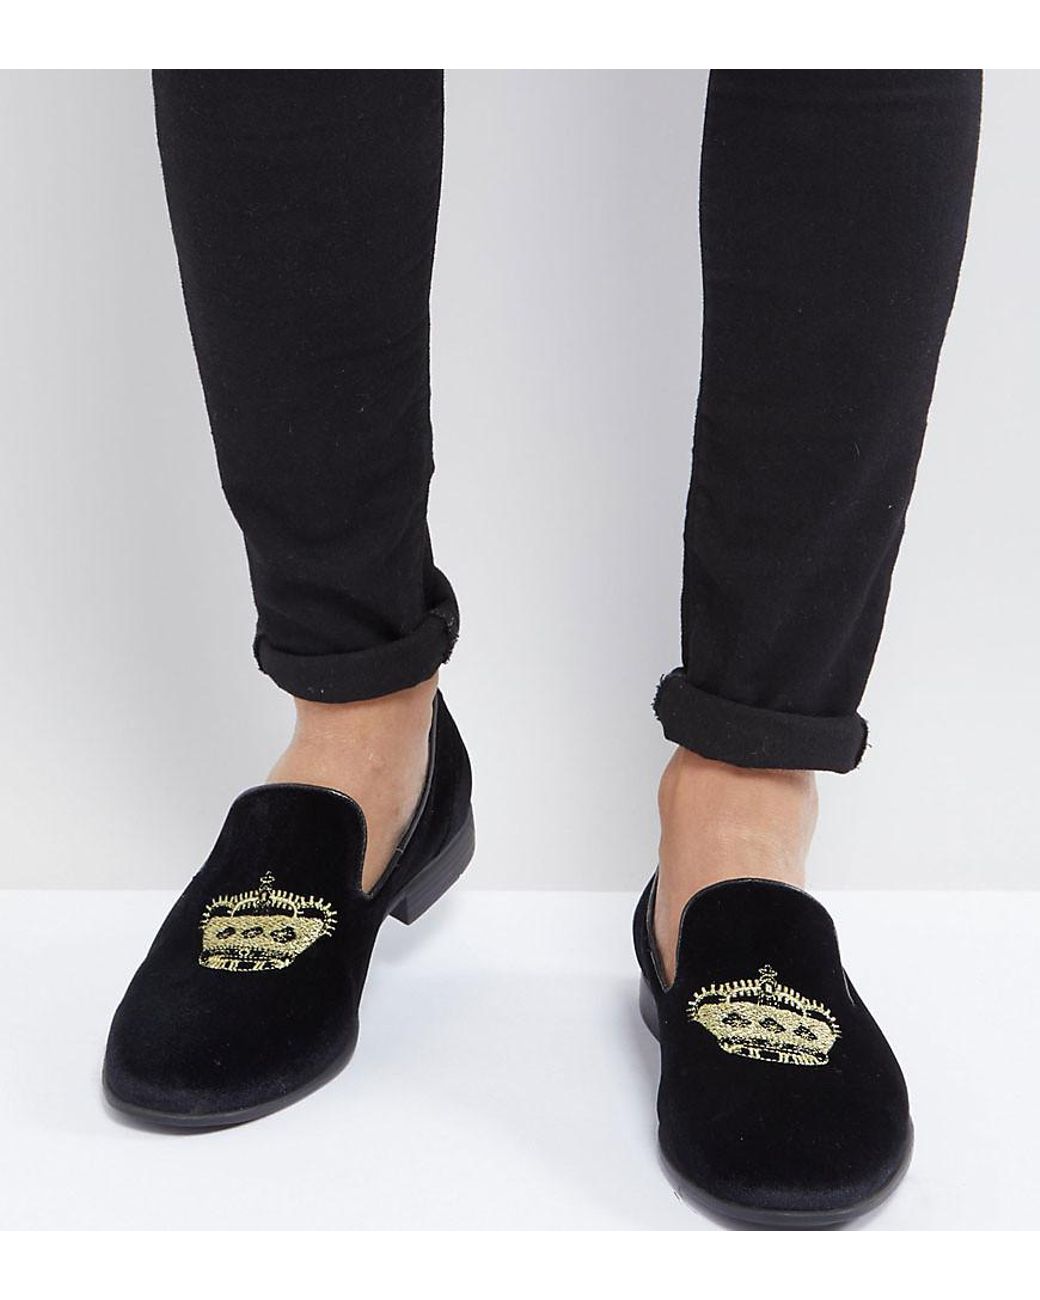 ASOS Loafers In Black Velvet With Crown Embroidery for Men | Lyst